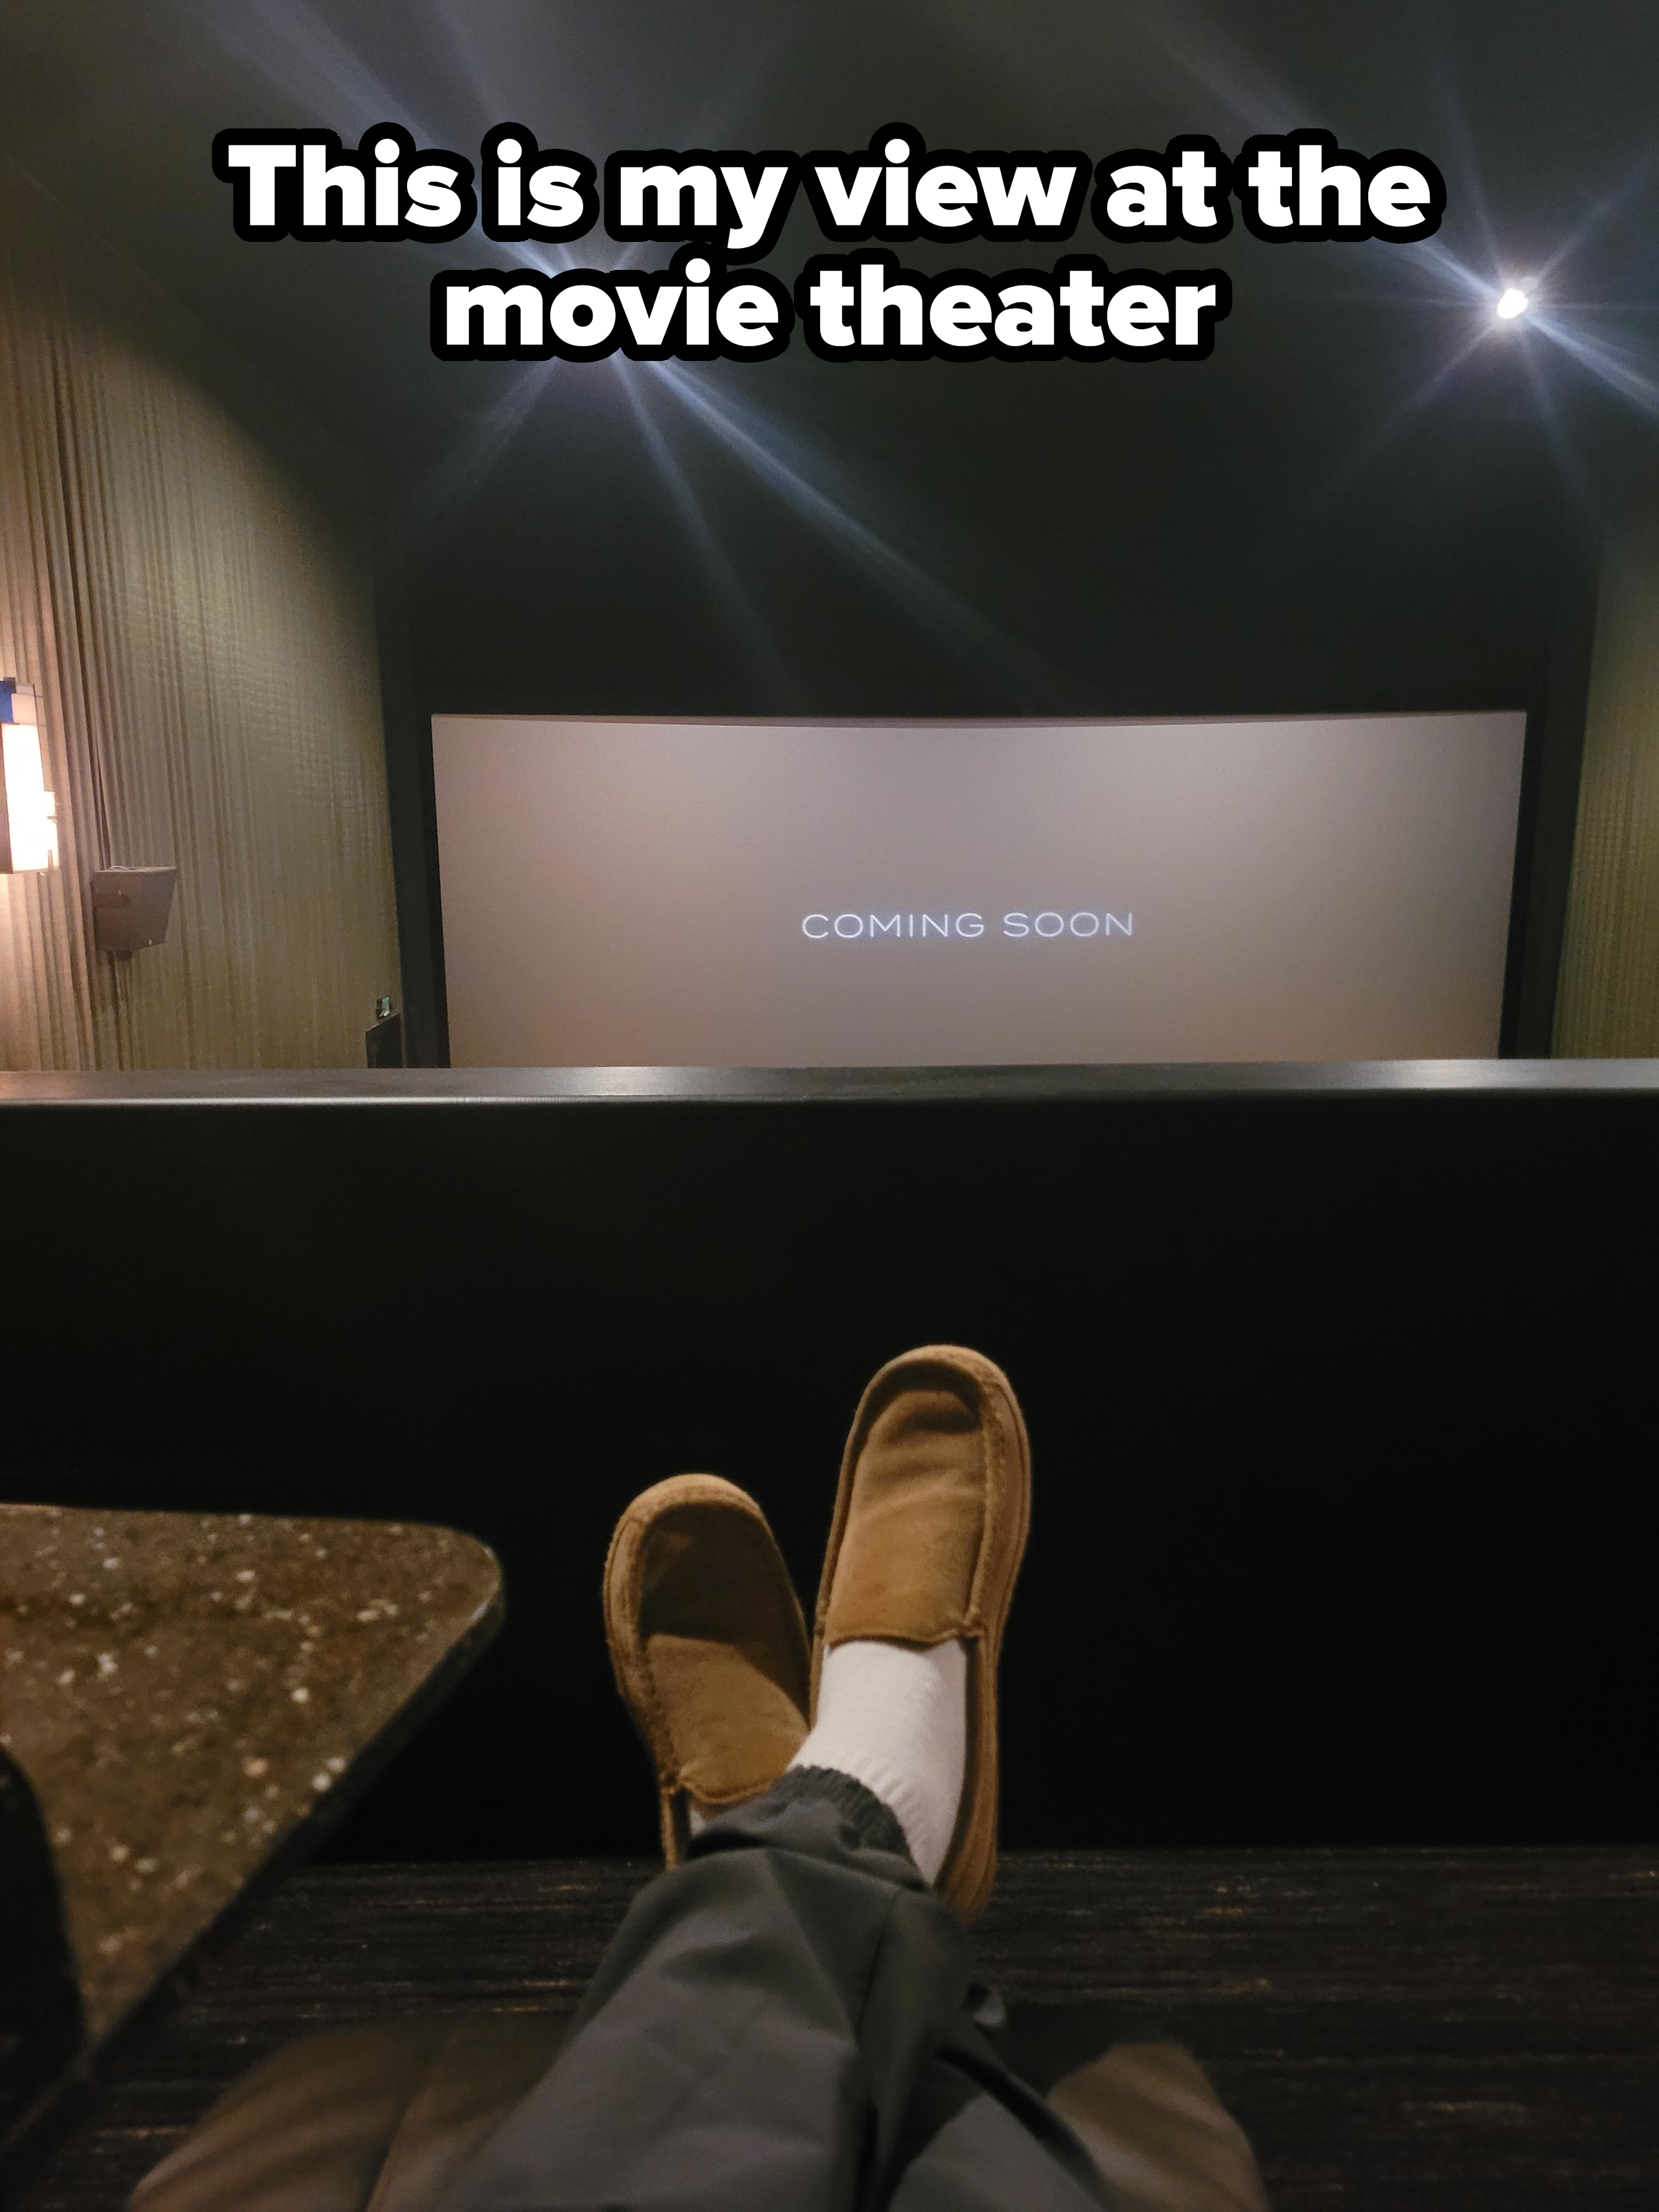 Person in a theater with feet on railing, &quot;COMING SOON&quot; on screen